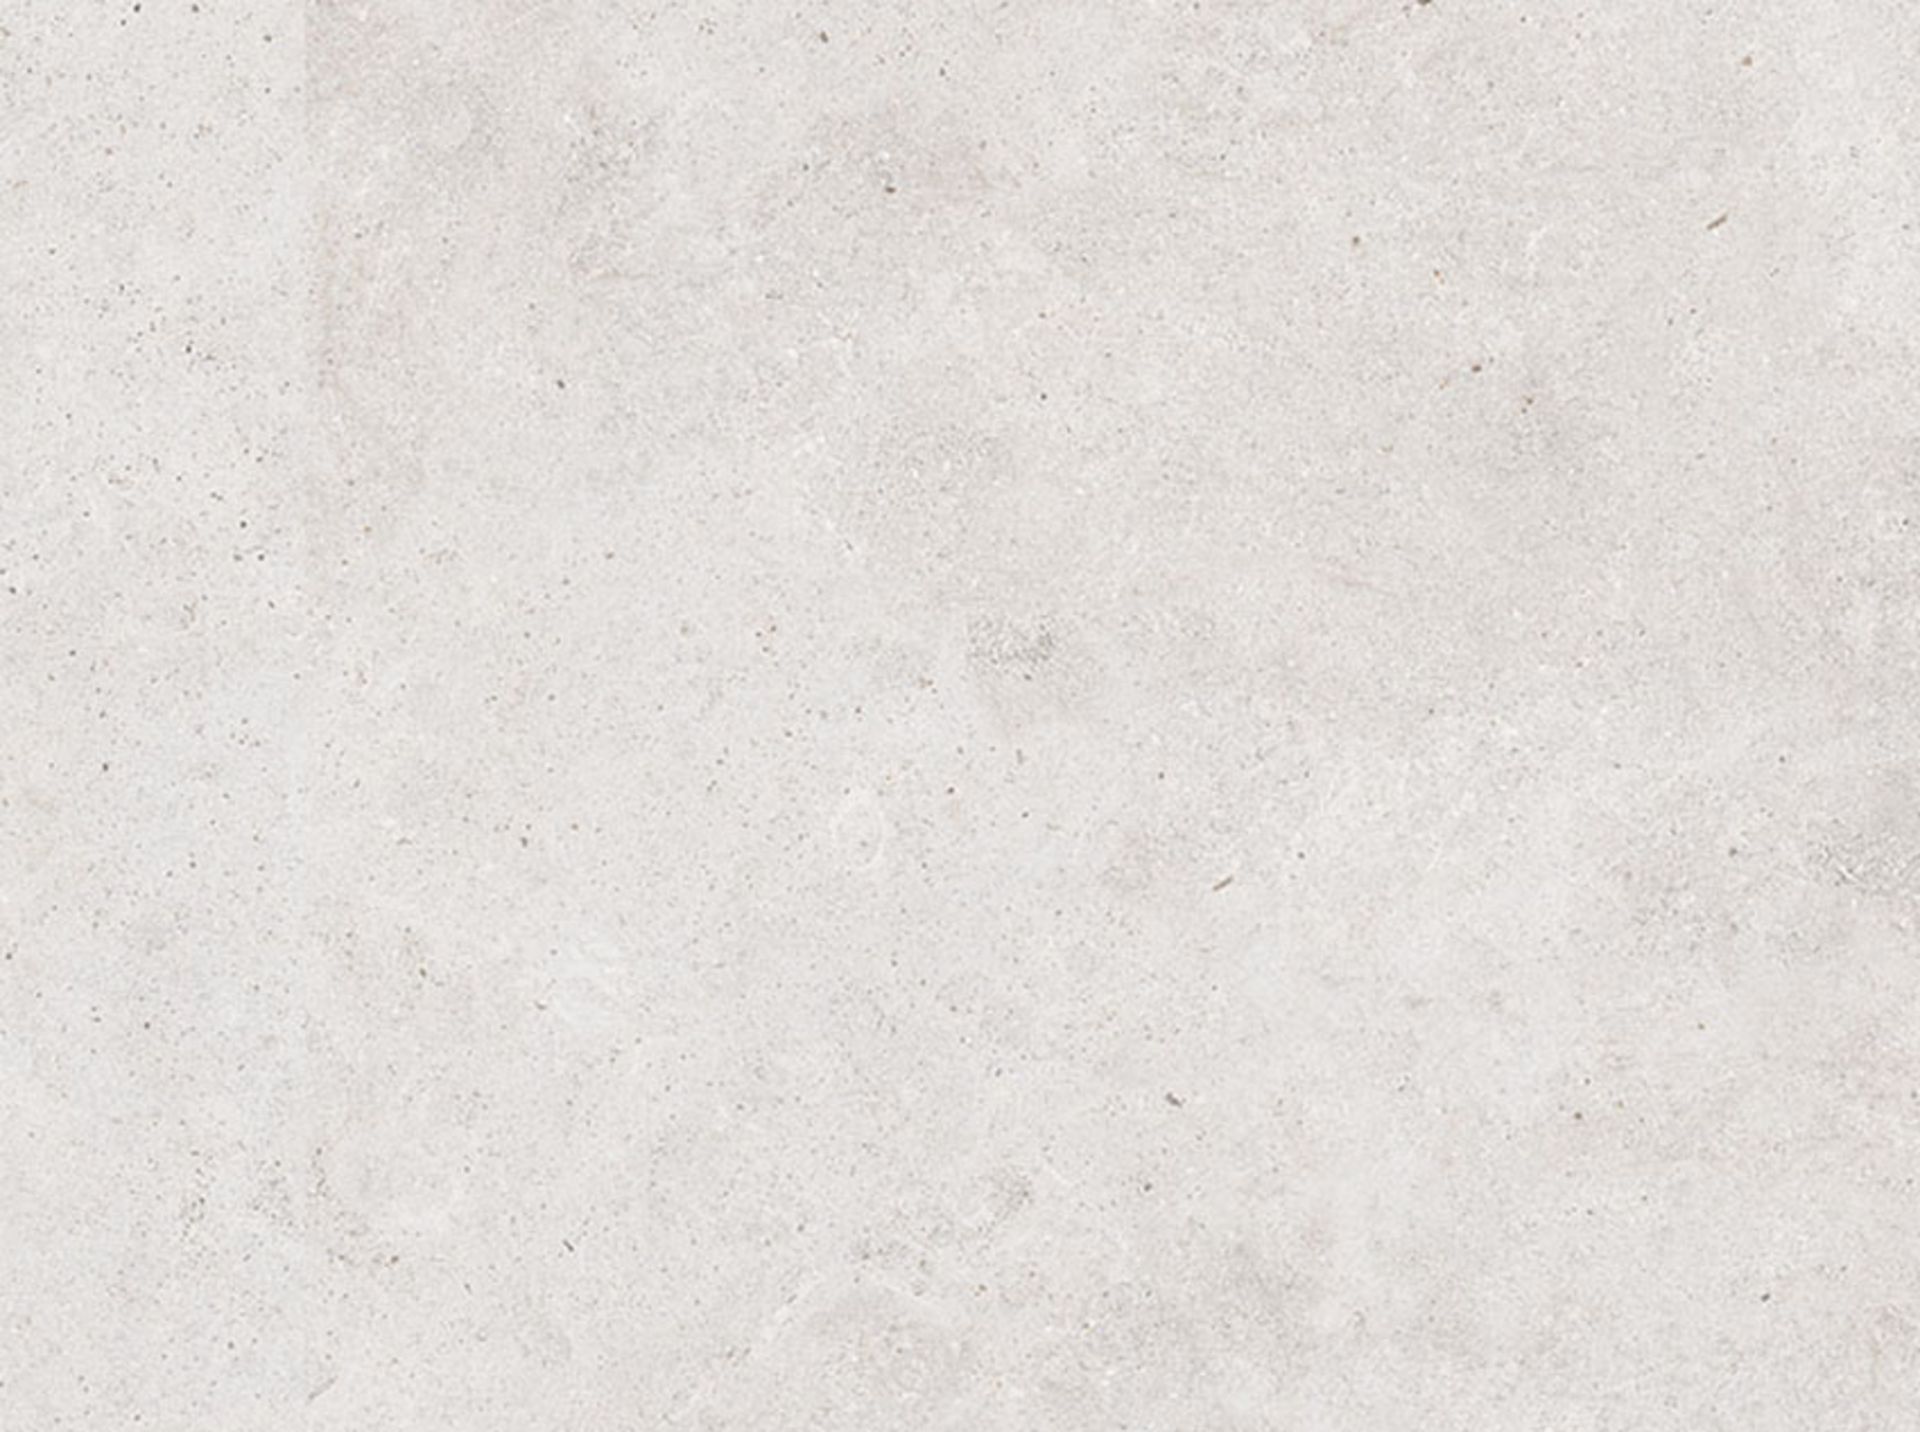 Prozzo 3006 - White - 60 X 120Cm - Stone/Screed Effect Porcelain Tiles - 50 Boxes (72Sqm) - Image 3 of 8